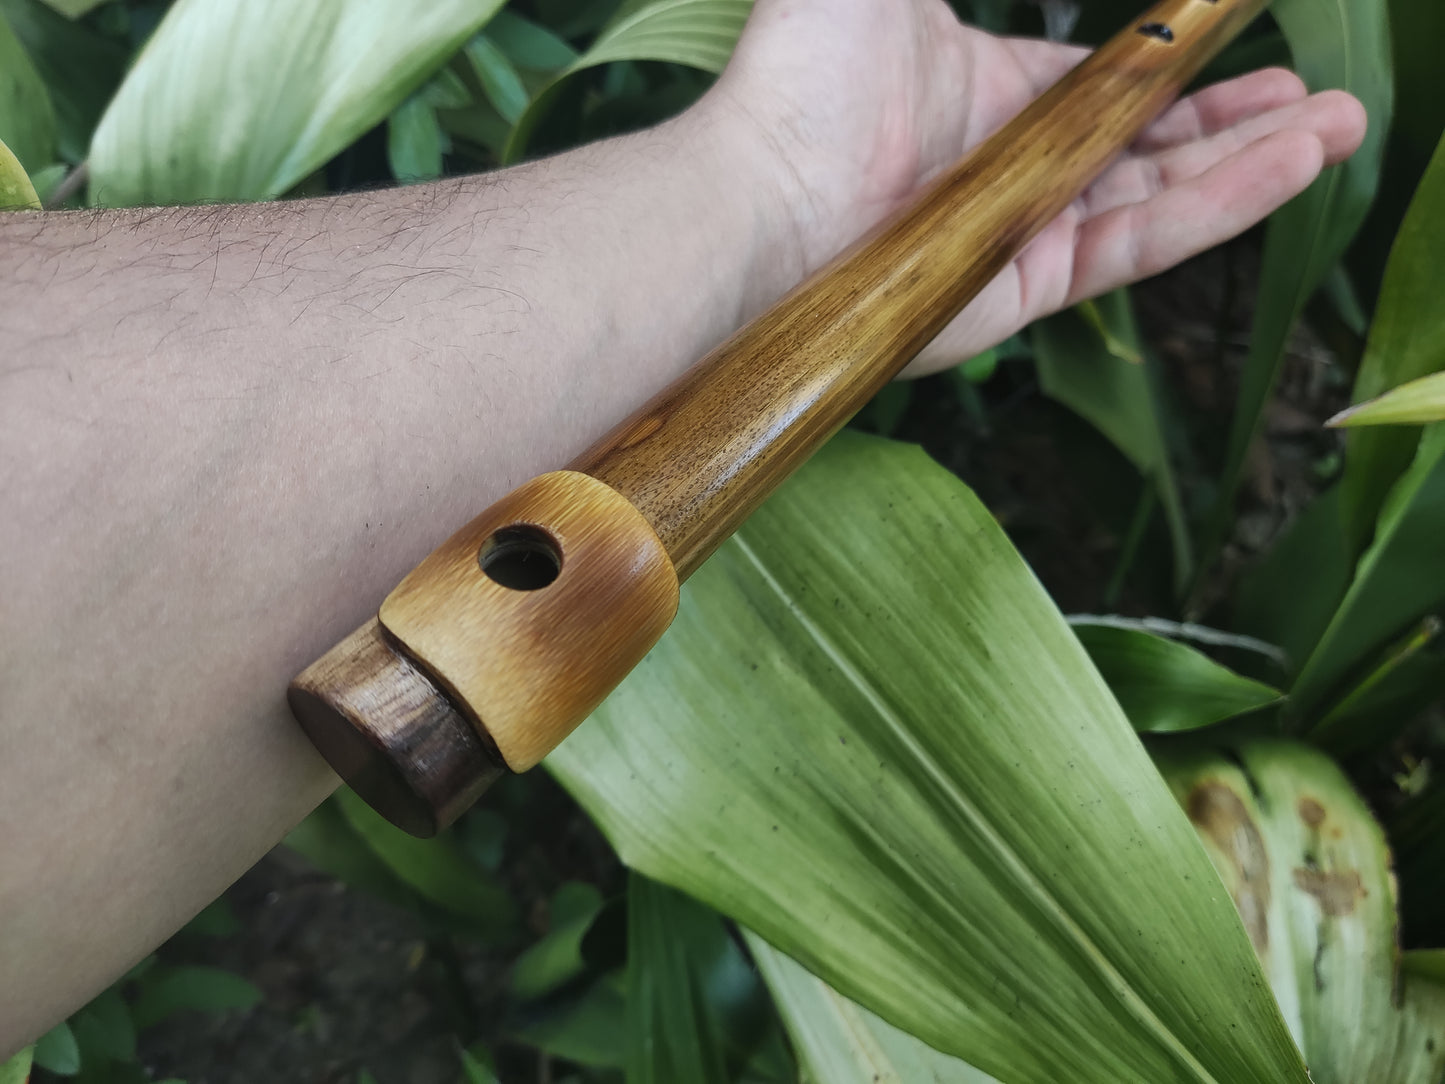 Low D Irish-style Bamboo Flute with a lip plate. Concert tuned handmade flute inspired by the Irish Flute | Sopro Flutes